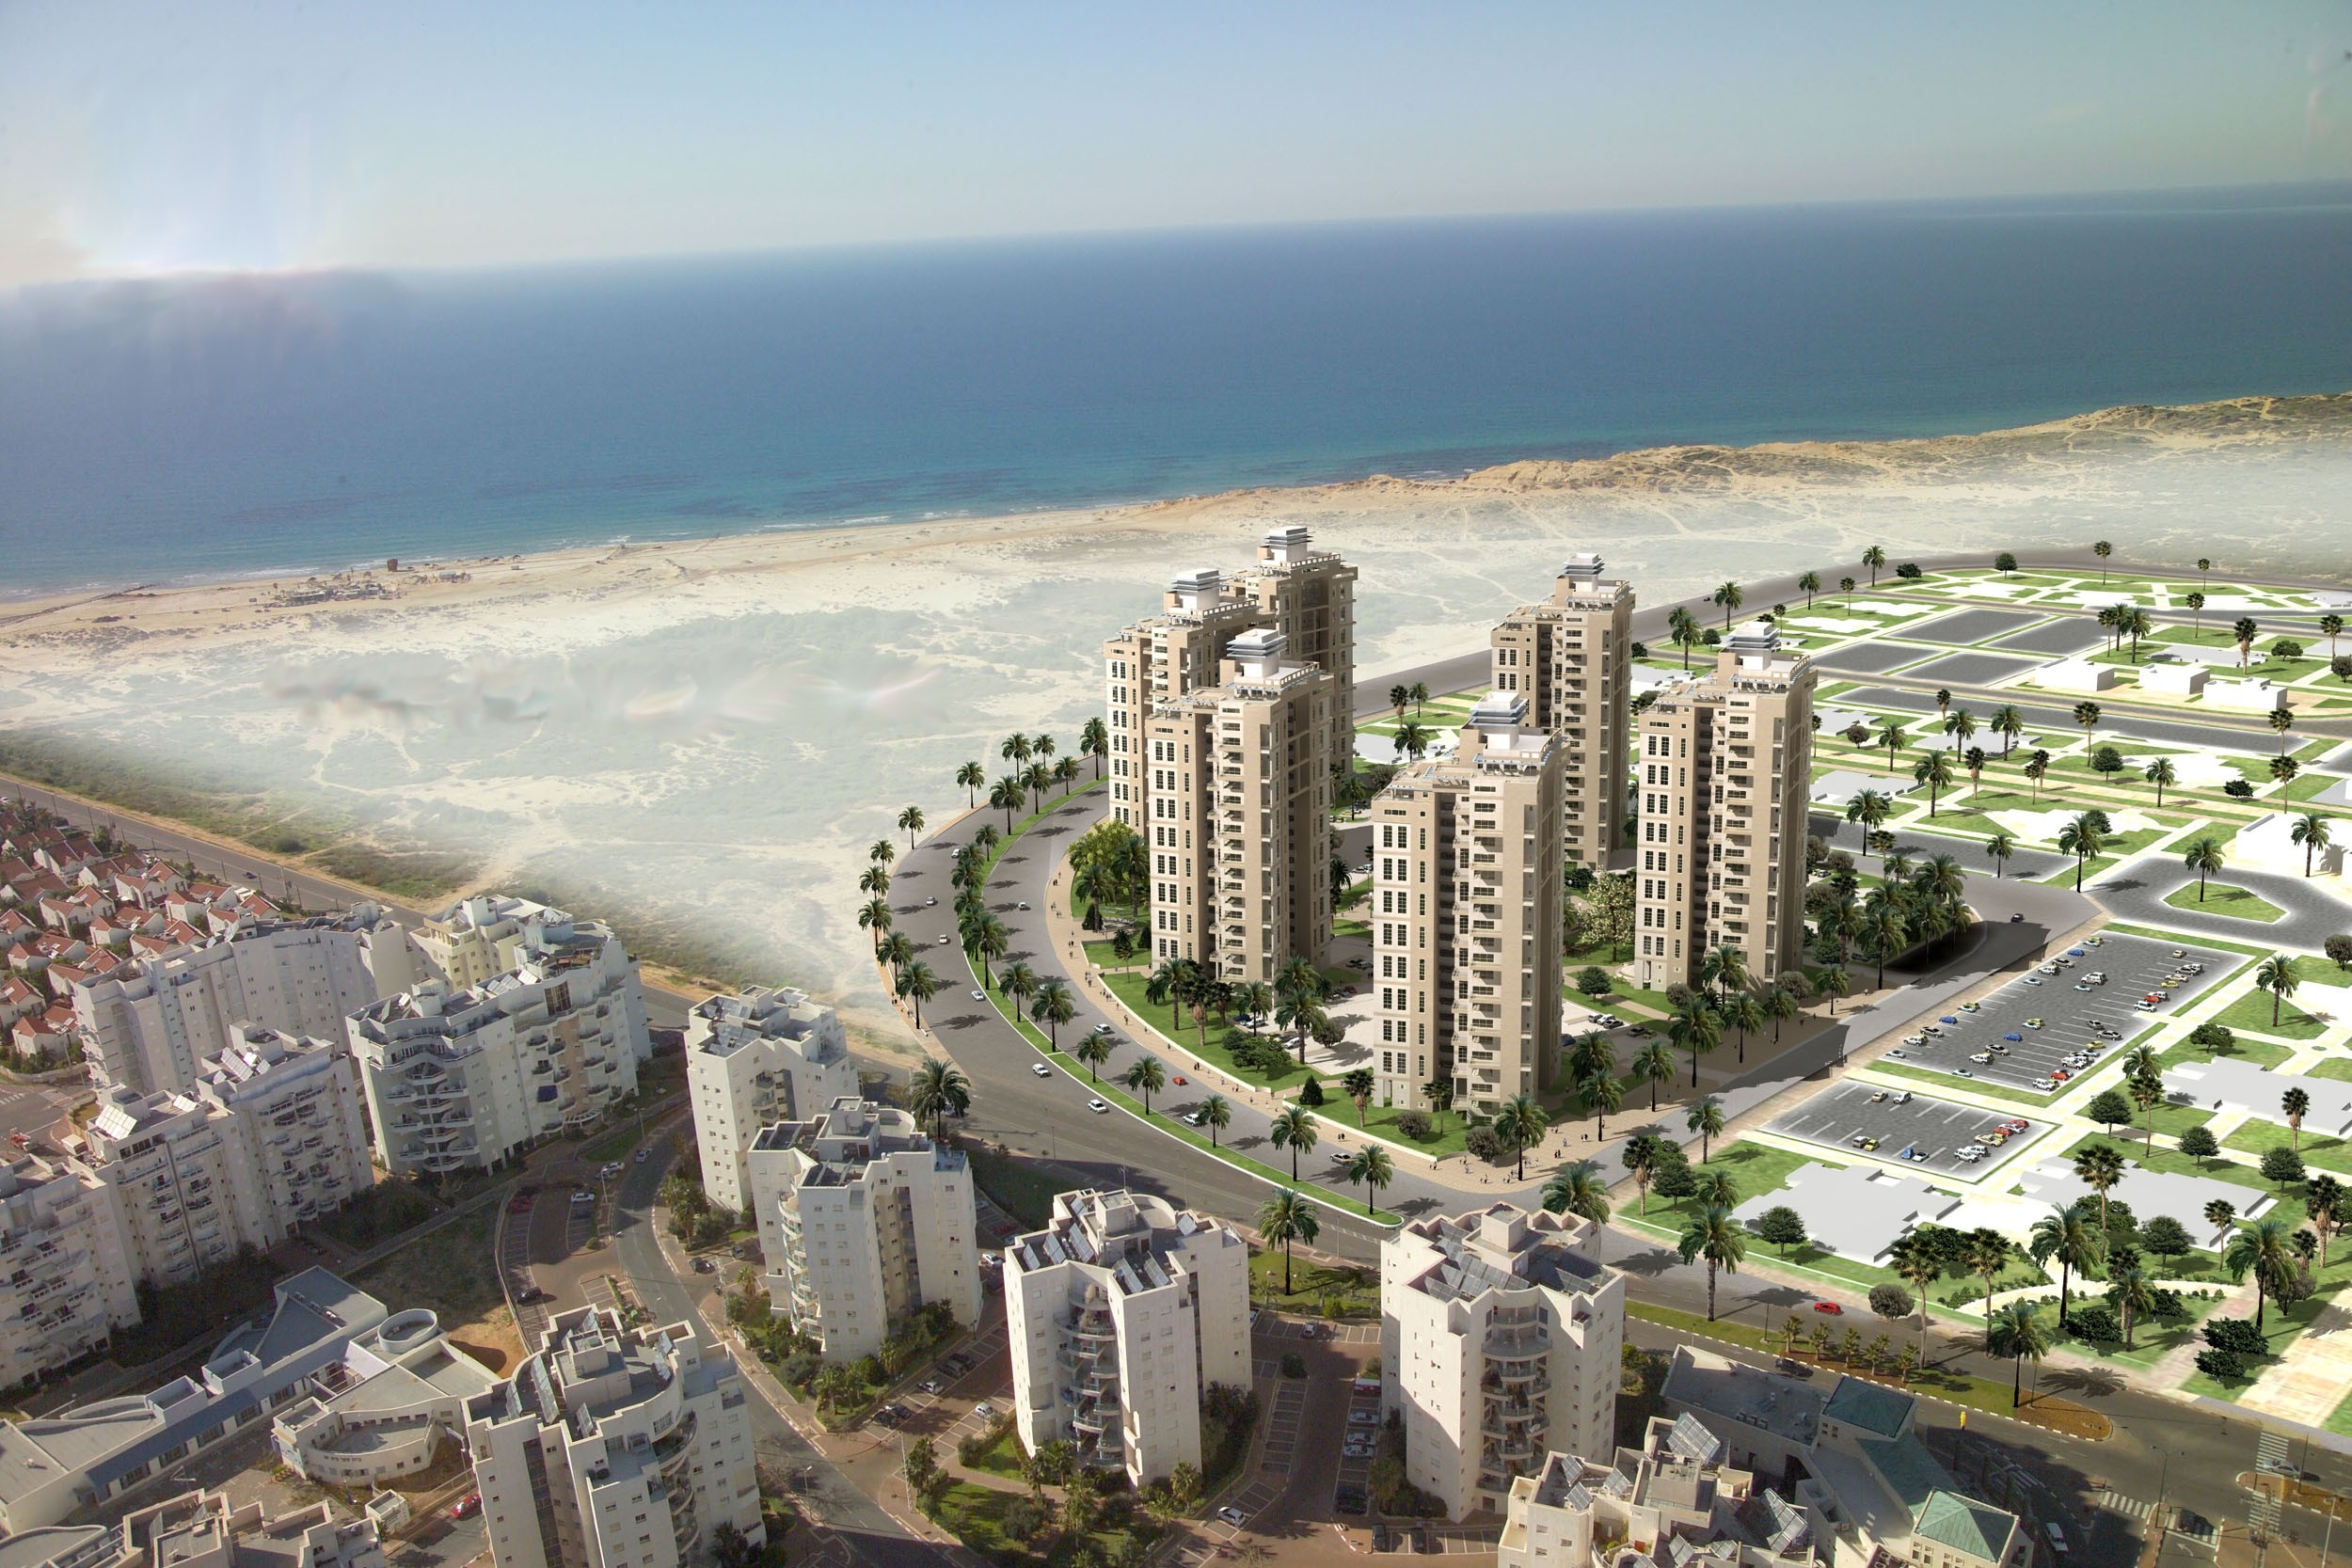 Study of the Ashdod apartment market on the bulletin board